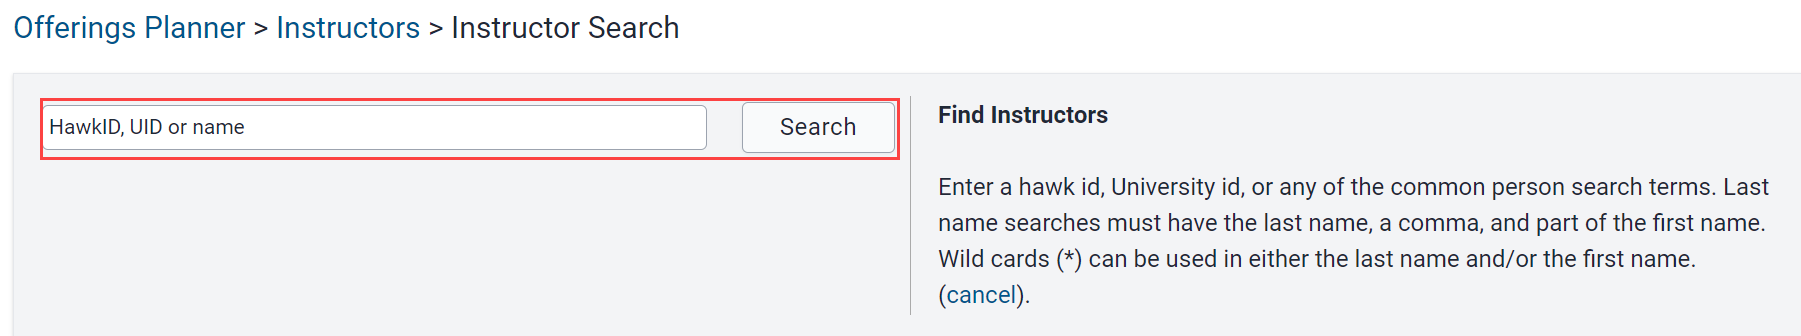 Search field where individual is located via HawkID, UID or name.